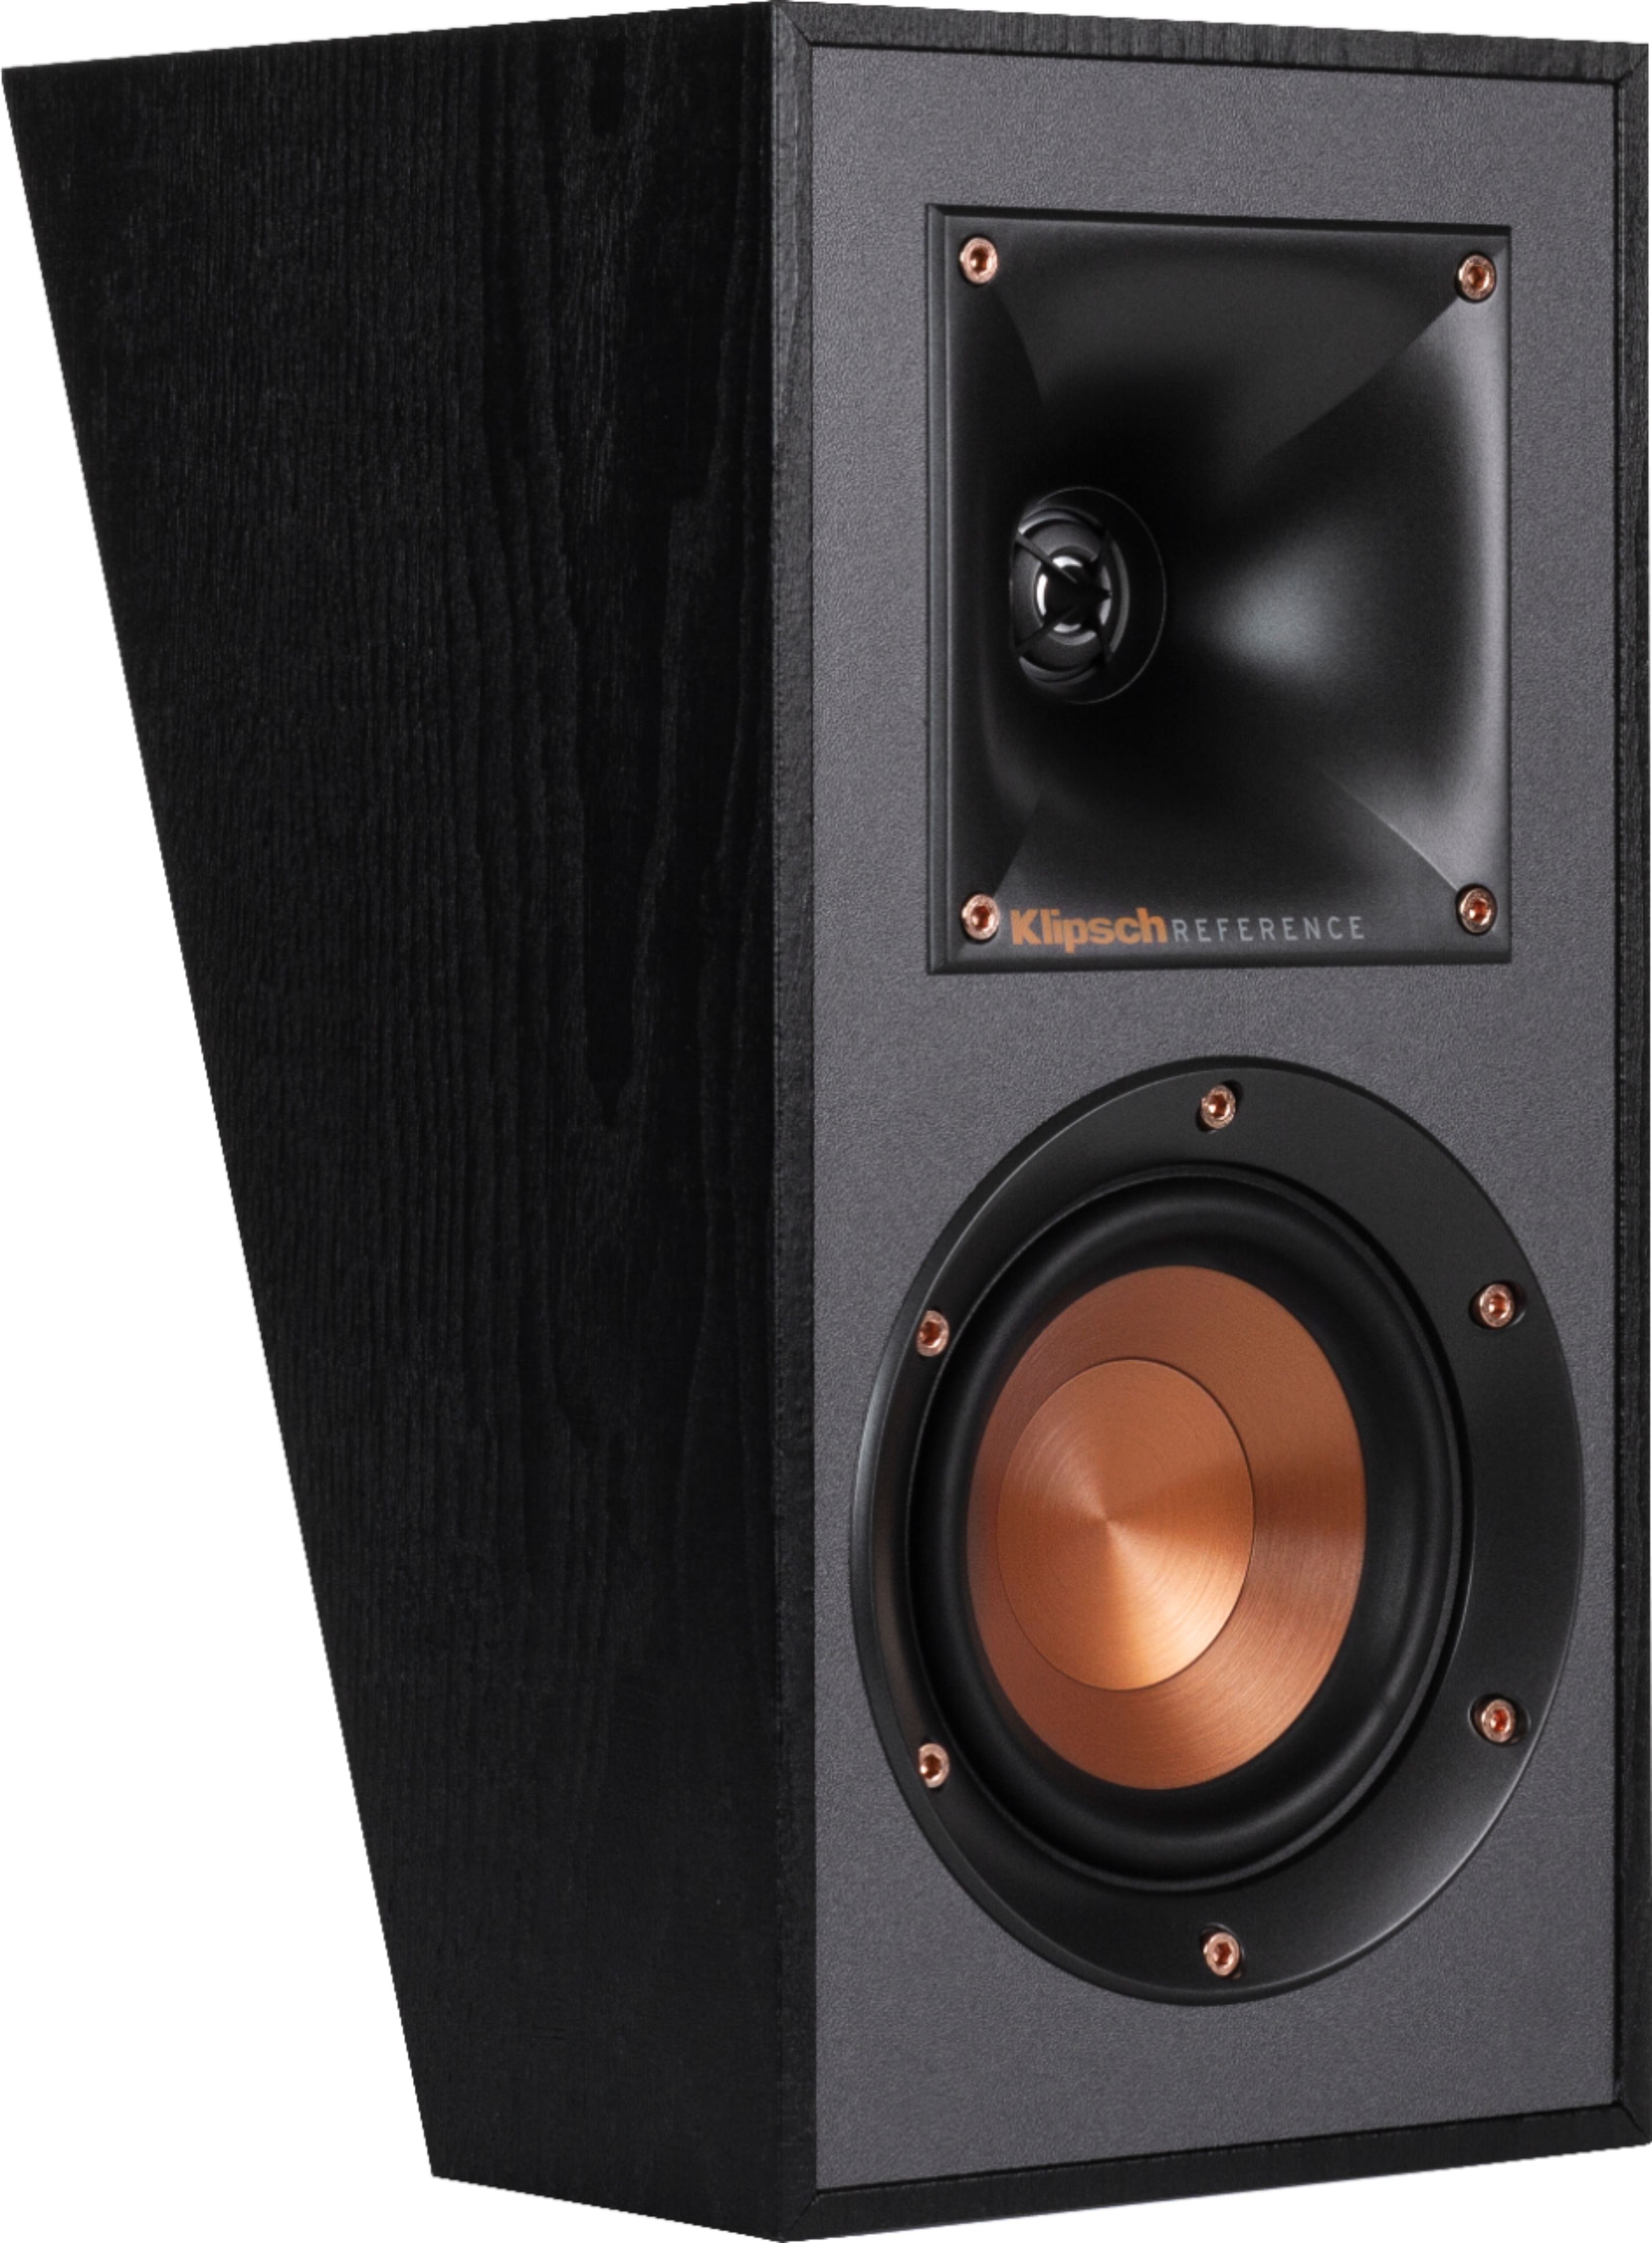 Angle View: Klipsch - Reference Series 4" 100-Watt Passive 2-Way Height Channel Speakers (Pair) - Black